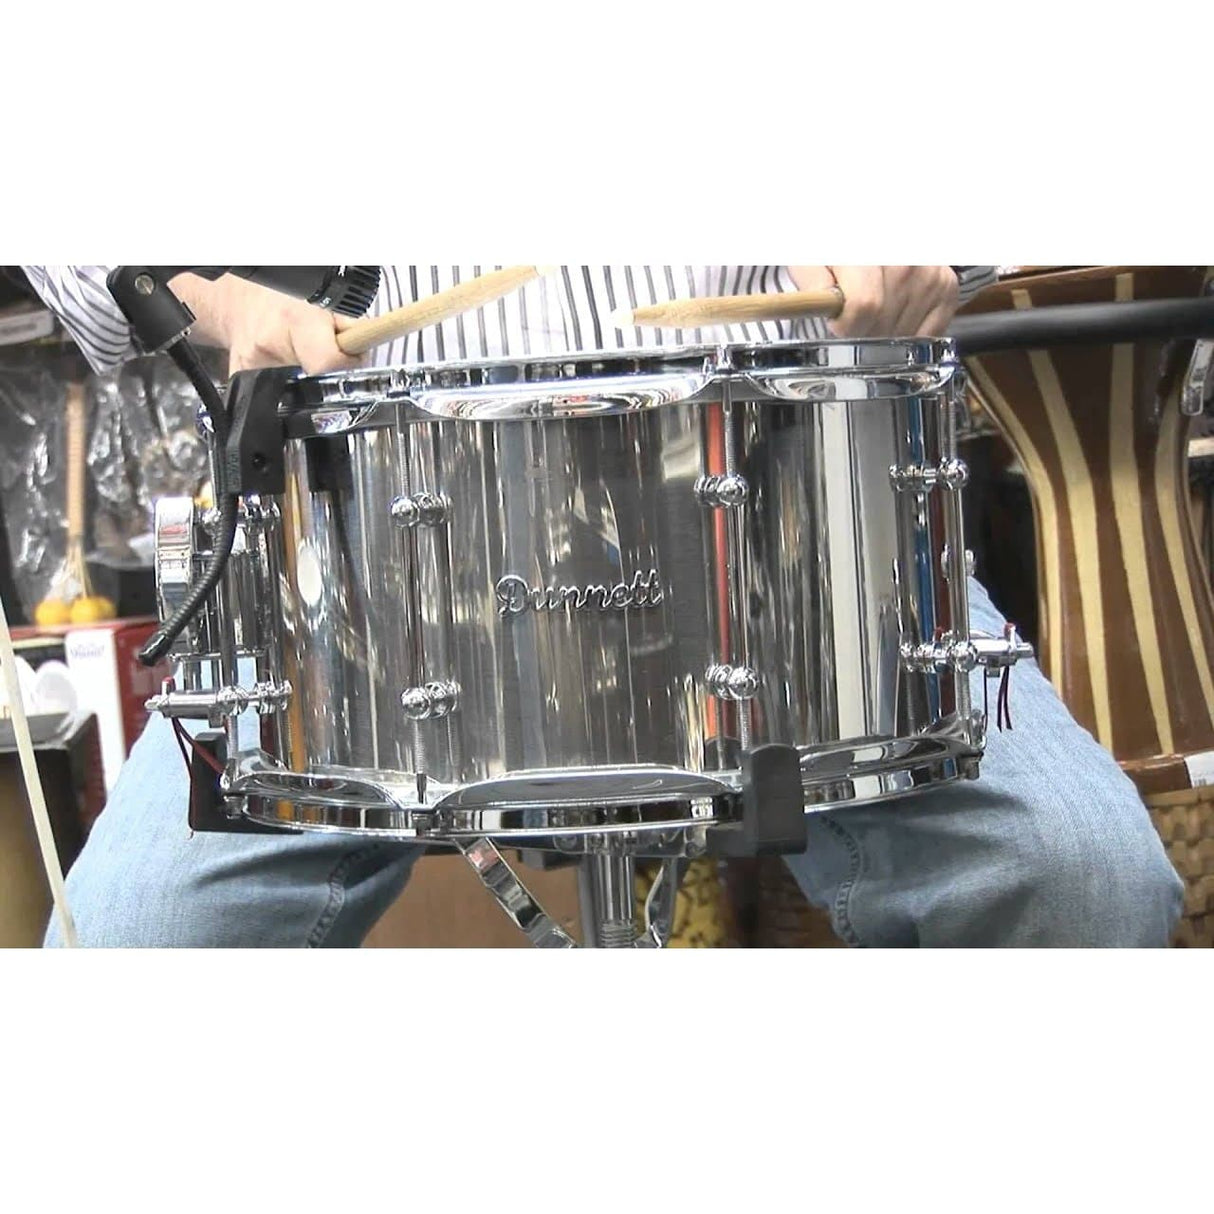 Dunnett Classic Stainless Steel Snare Drum 14x8 Polished